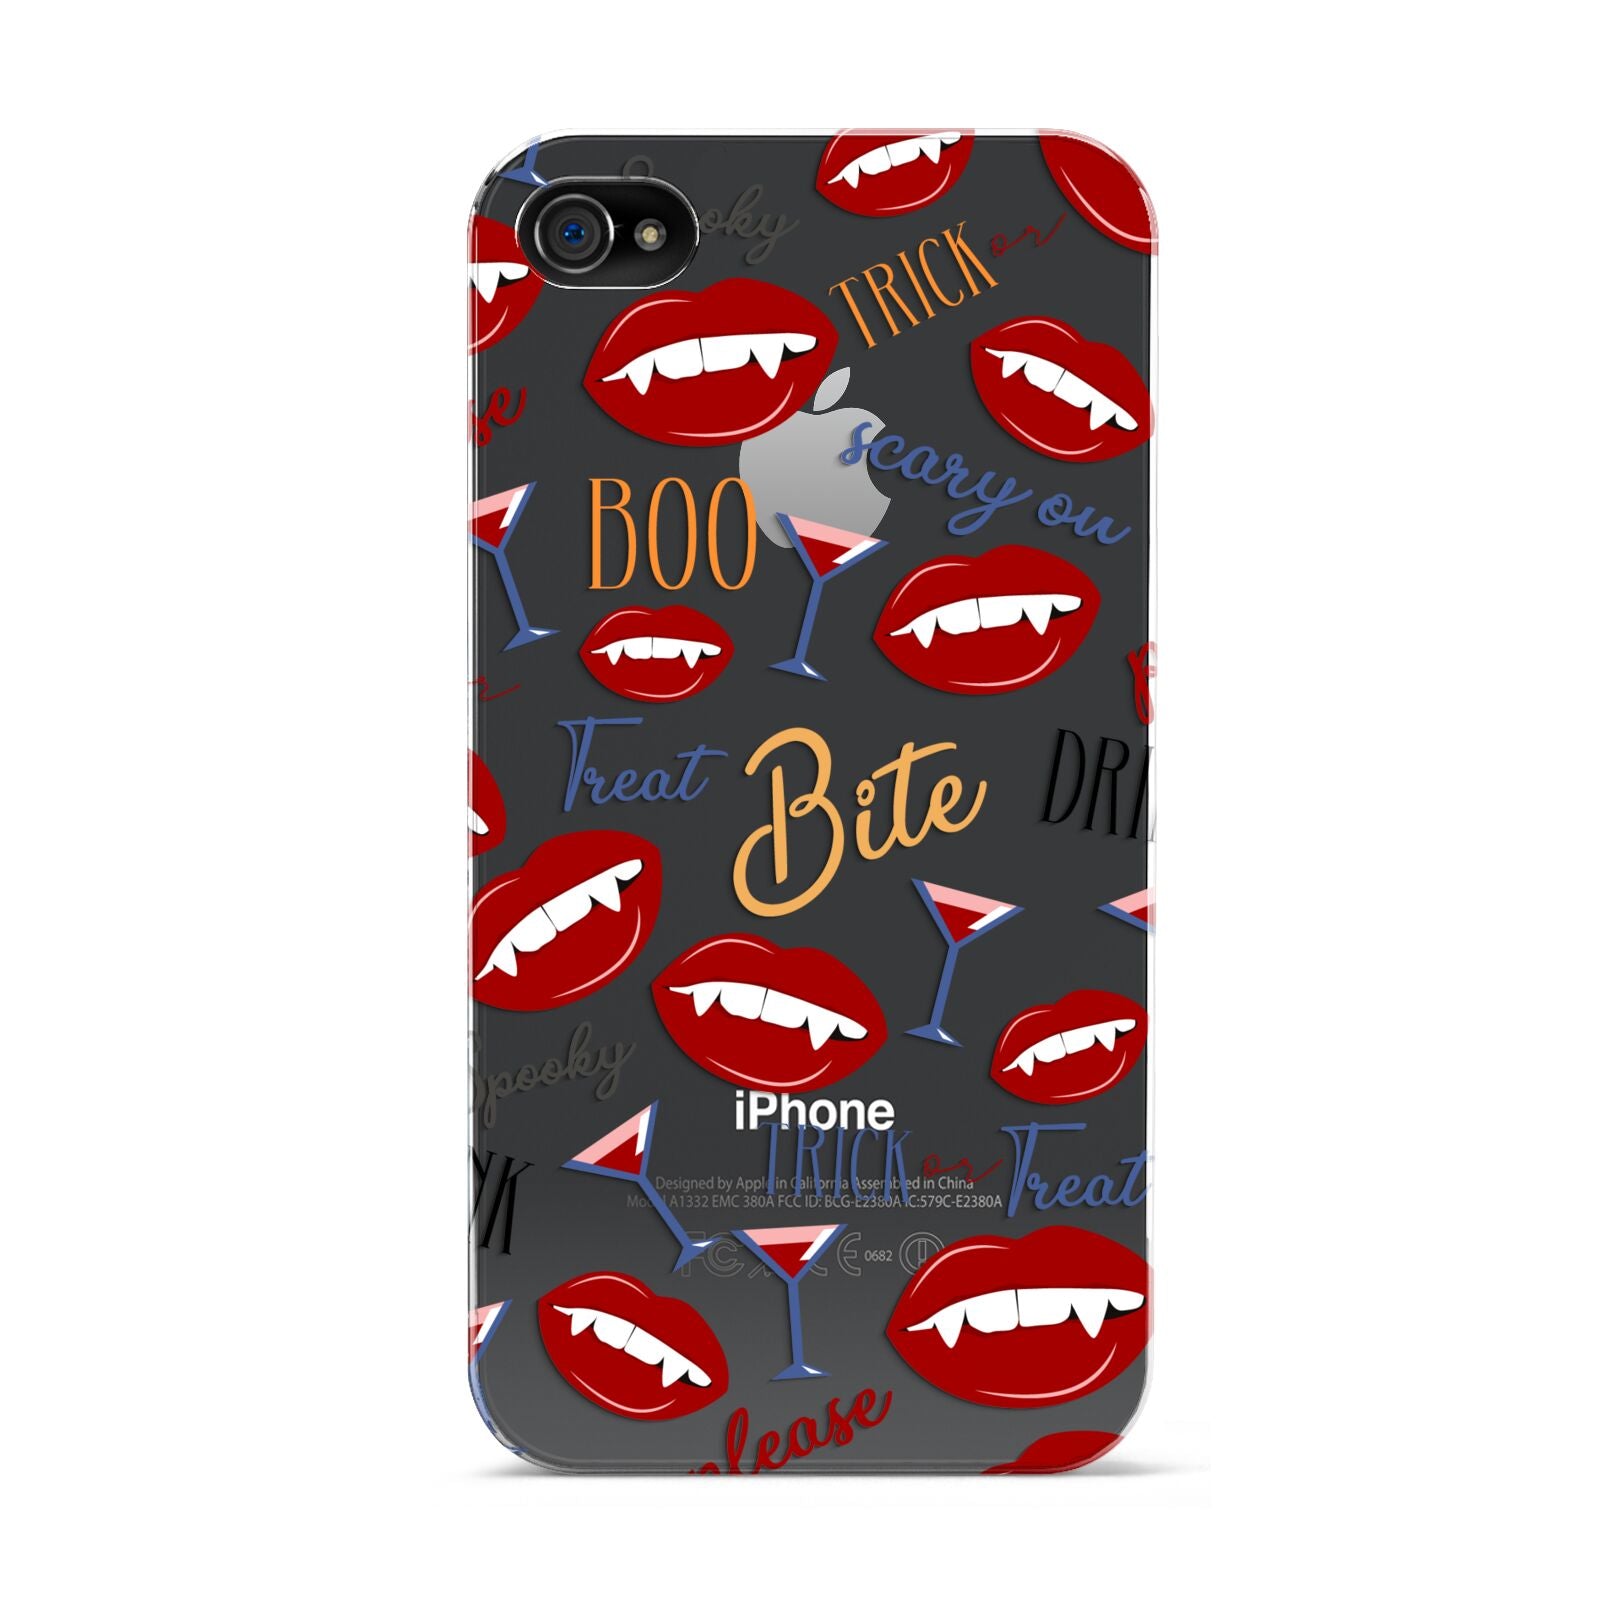 Vampire Illustrations and Catchphrases Apple iPhone 4s Case